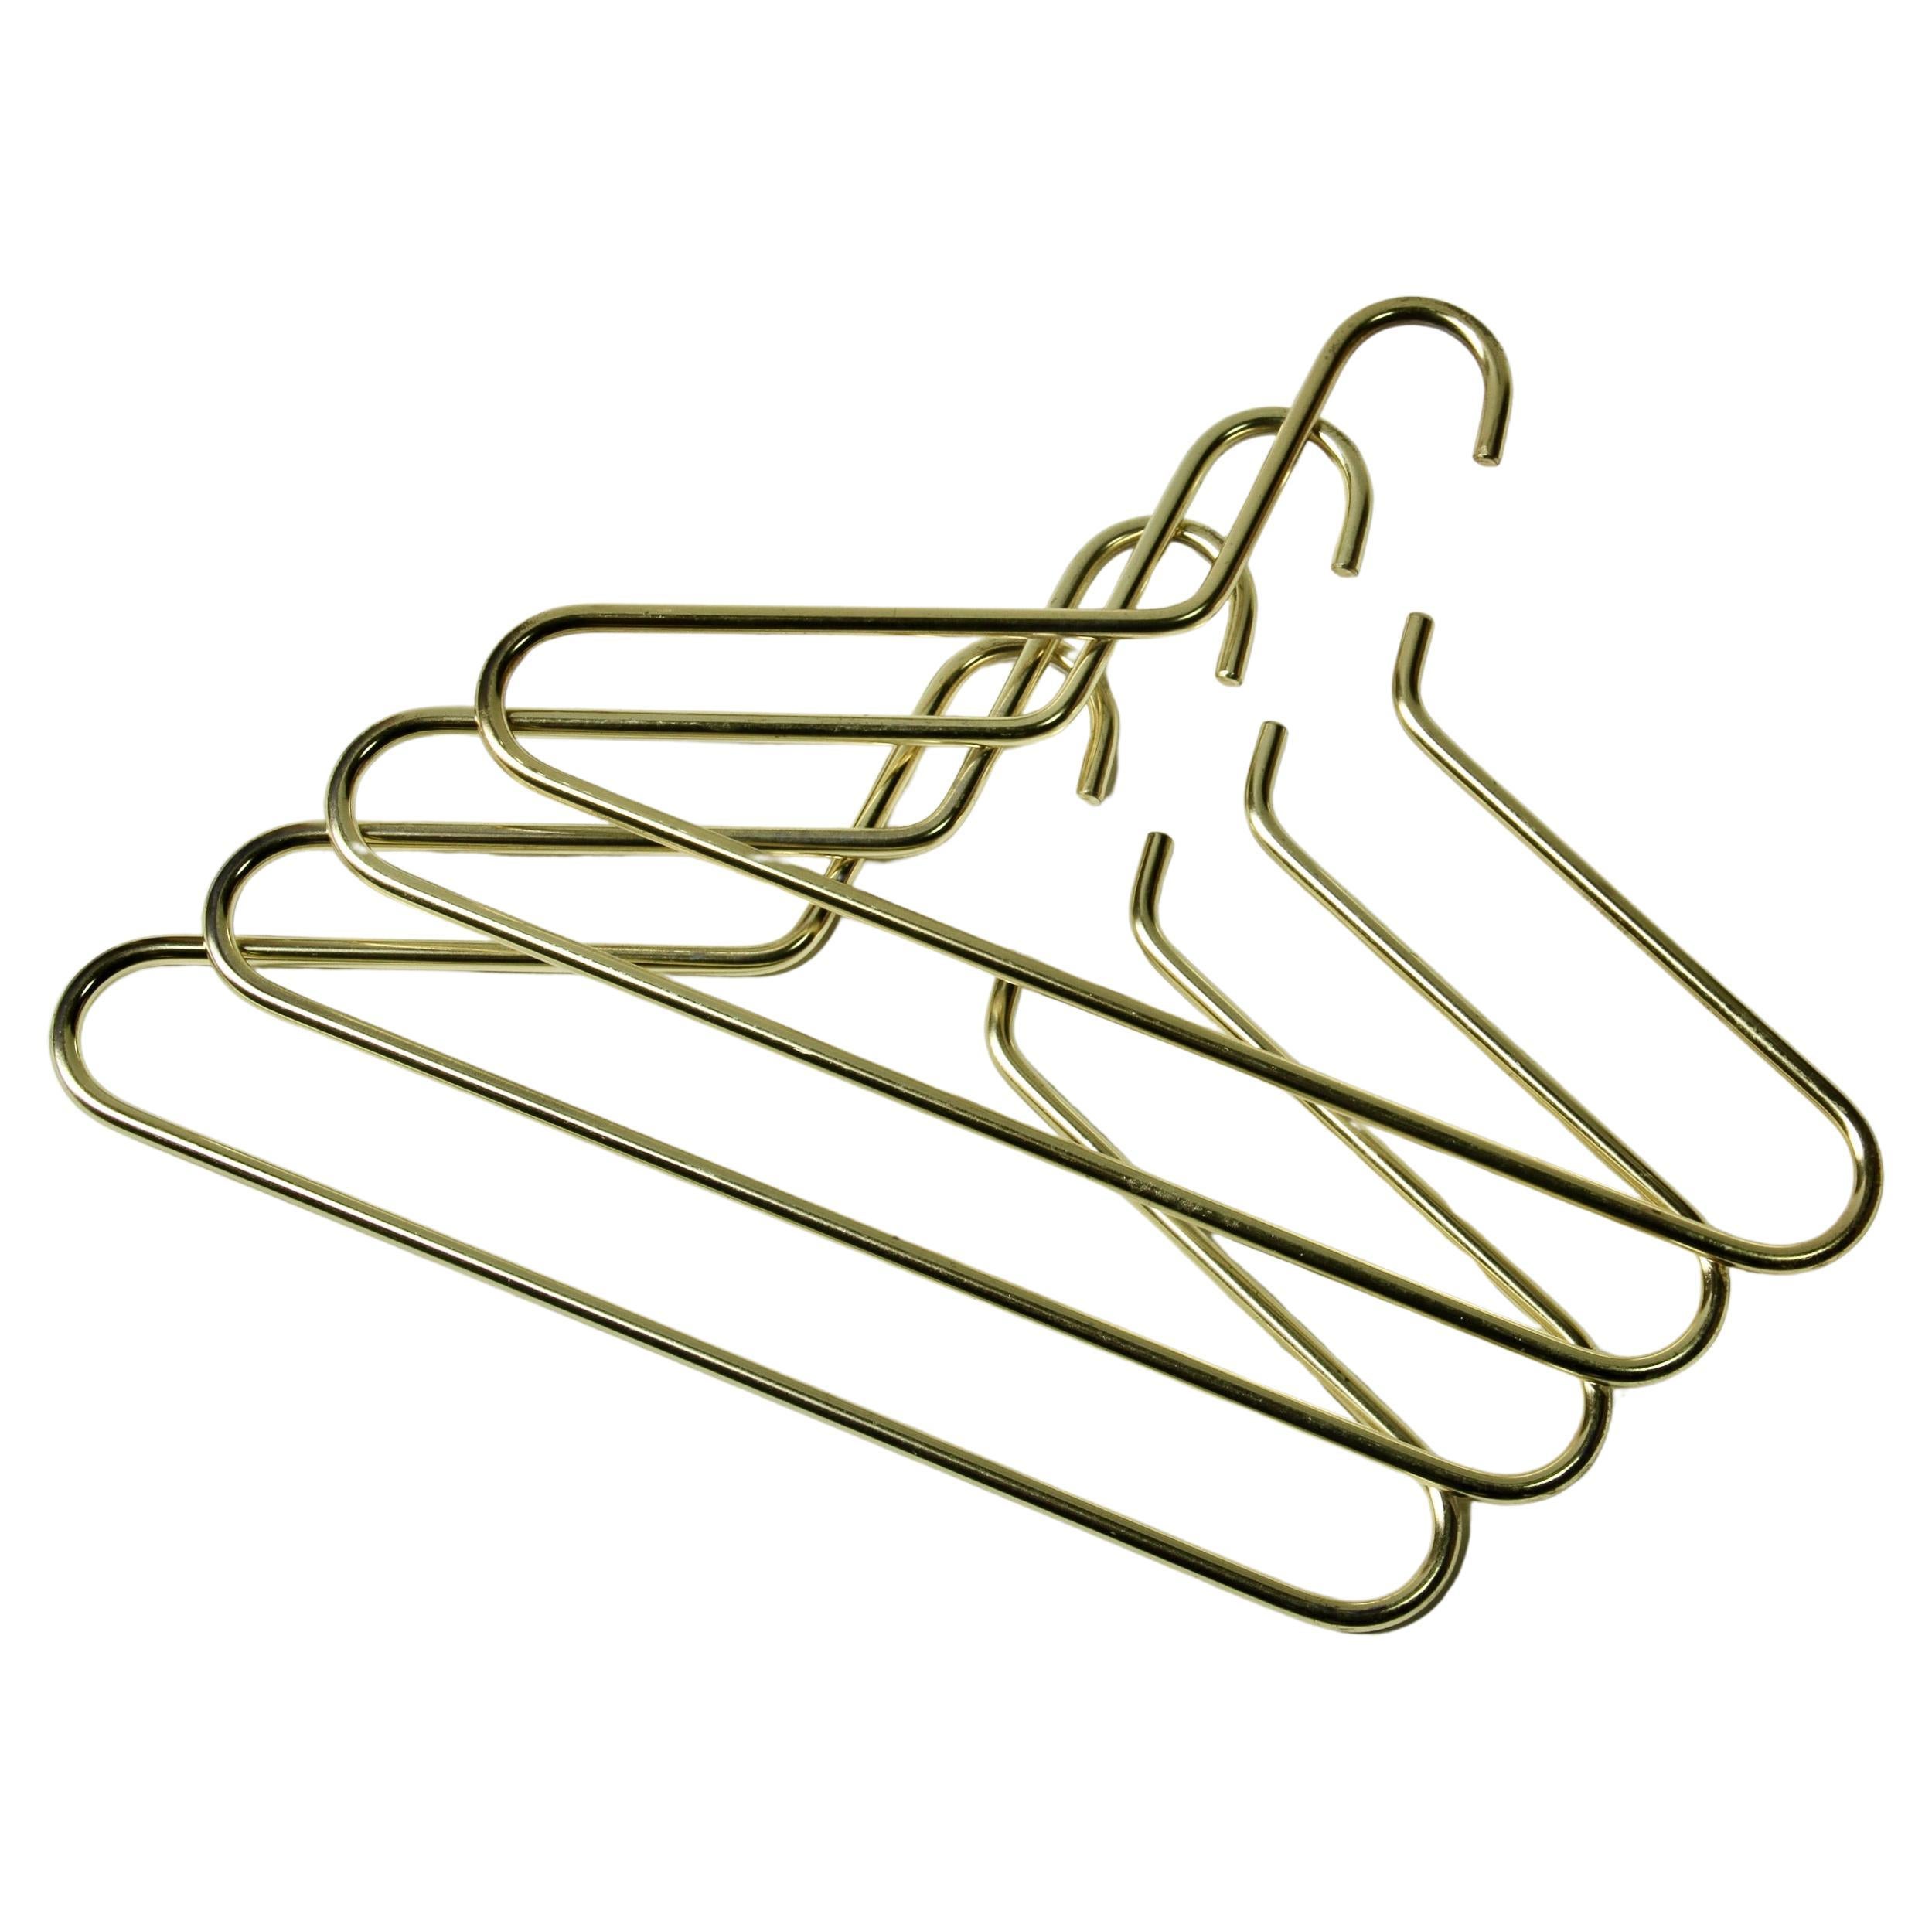 Austrian 1 of 4 Carl Auböck Attributed Mid-Century Modern Brass Coat Hangers Clothes Rack For Sale